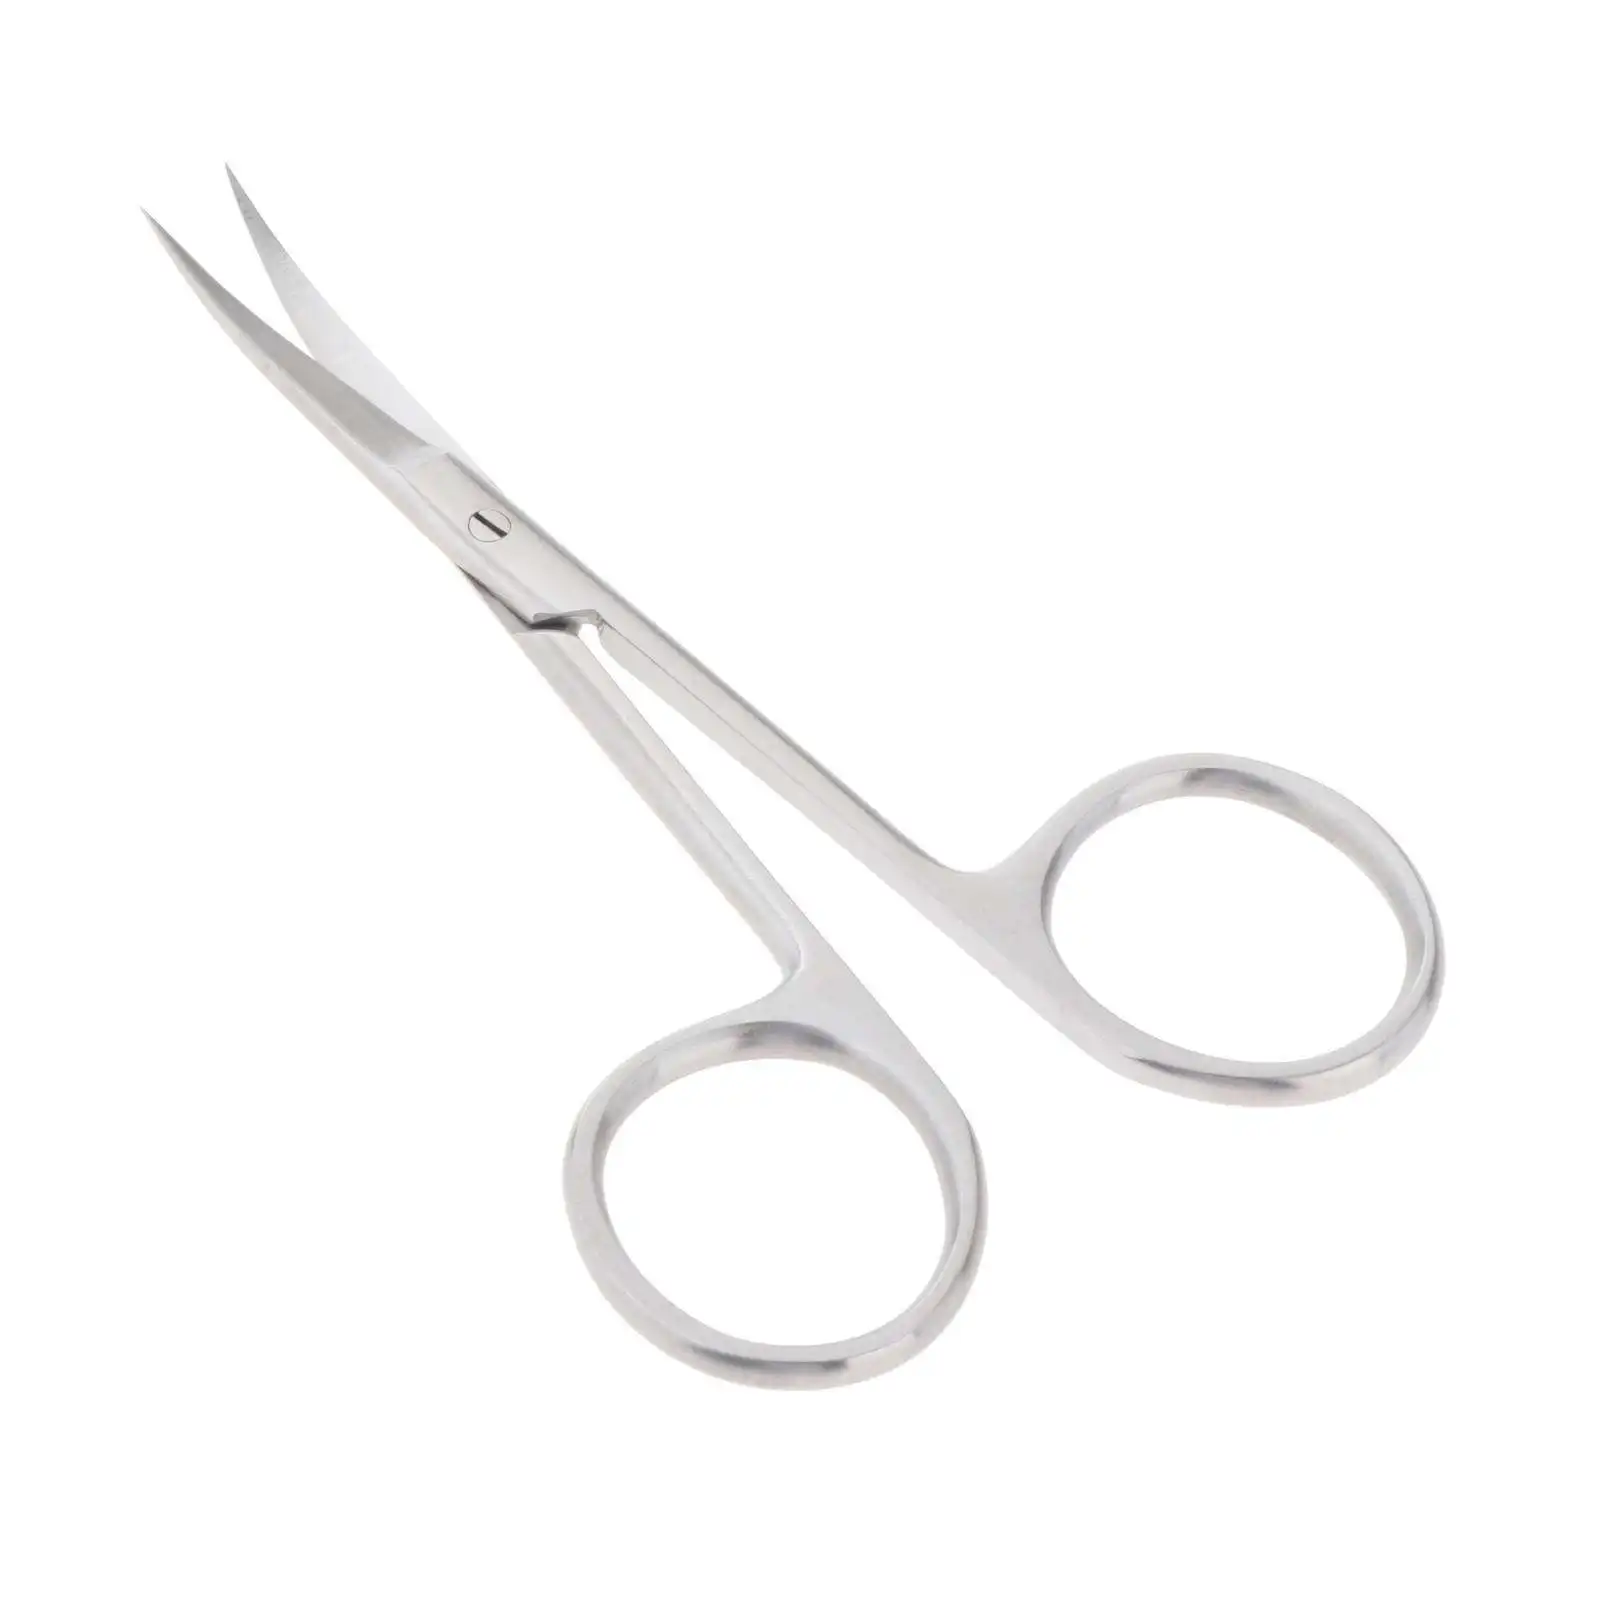 Cuticle Scissors Durable Curved Stainless Steel Multi-Purpose Manicure Tool for Nose Beard Ear Hair Home Use Hotel Travel